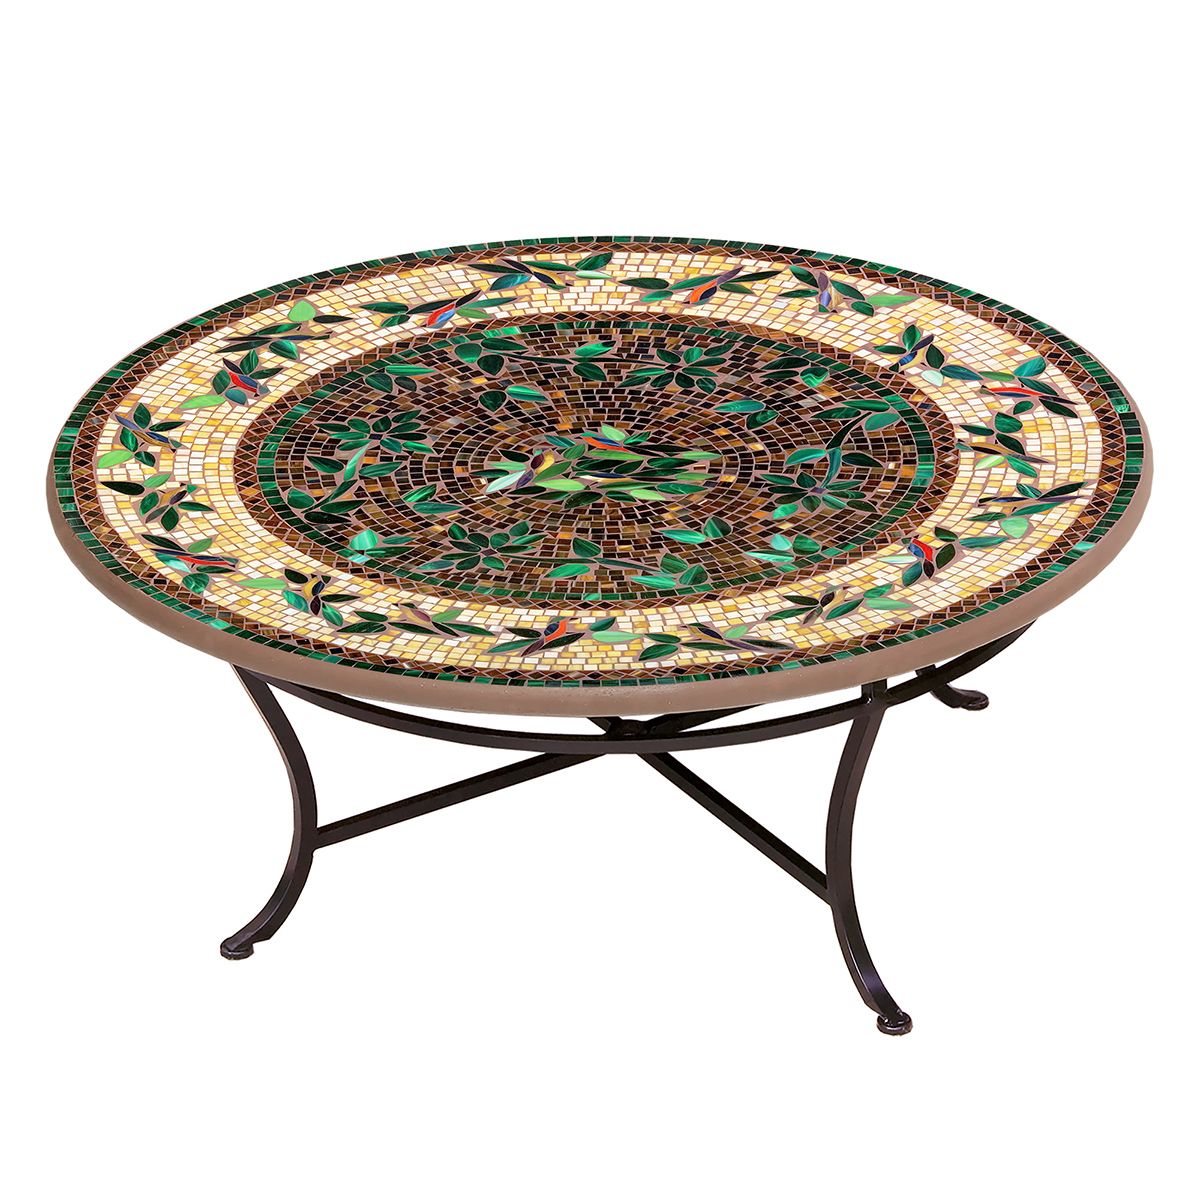 Finch Mosaic Coffee Table-Iron Accents